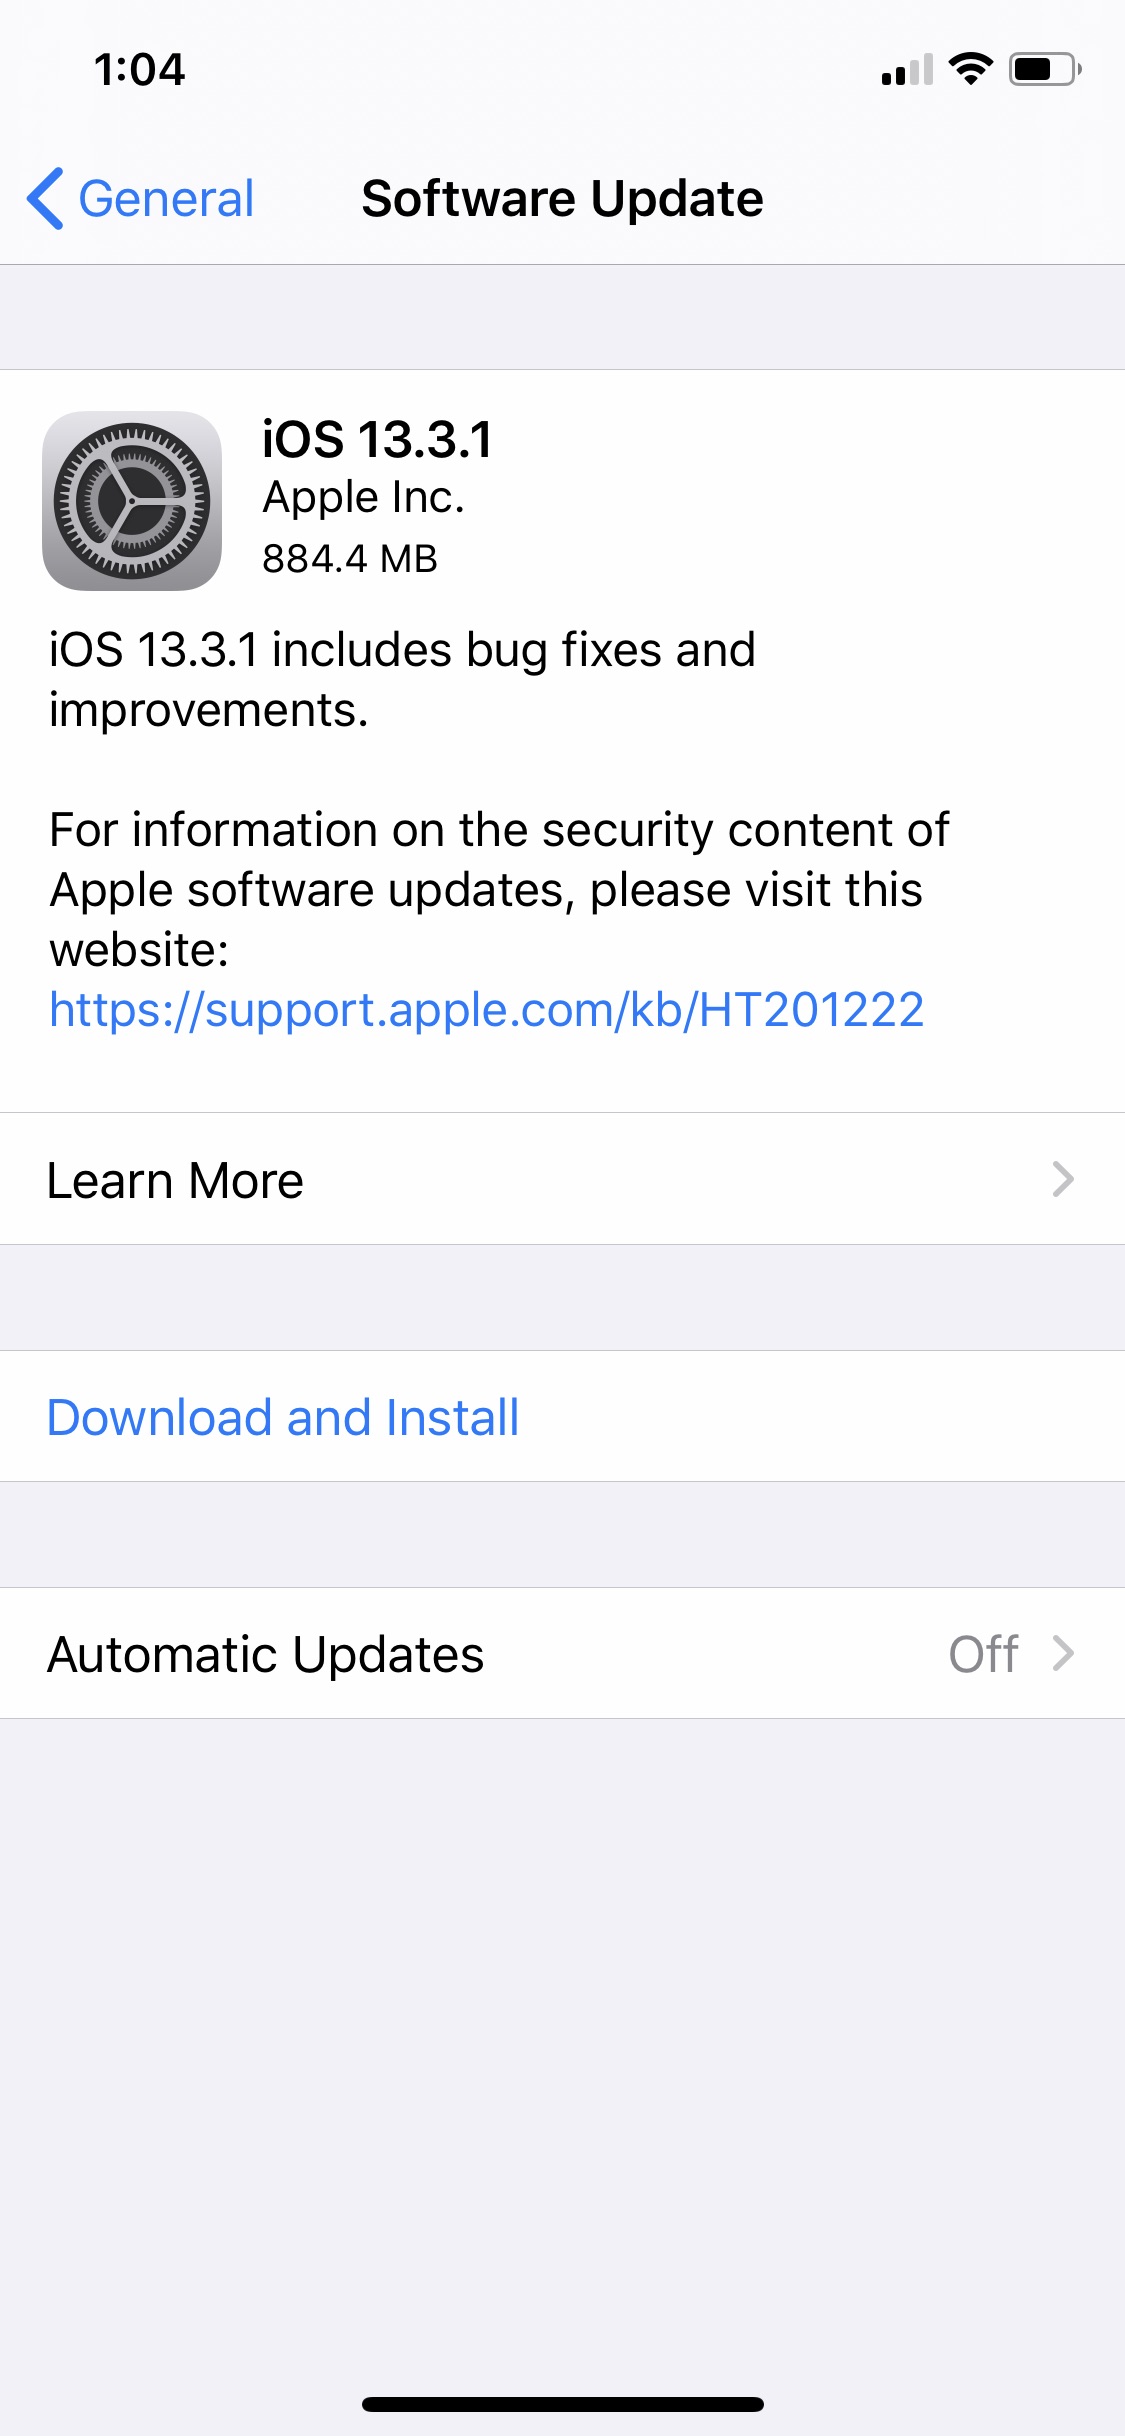 Apple Releases iOS 13.3.1 With Fixes for FaceTime, Communication Limits, Location Services, More [Download]